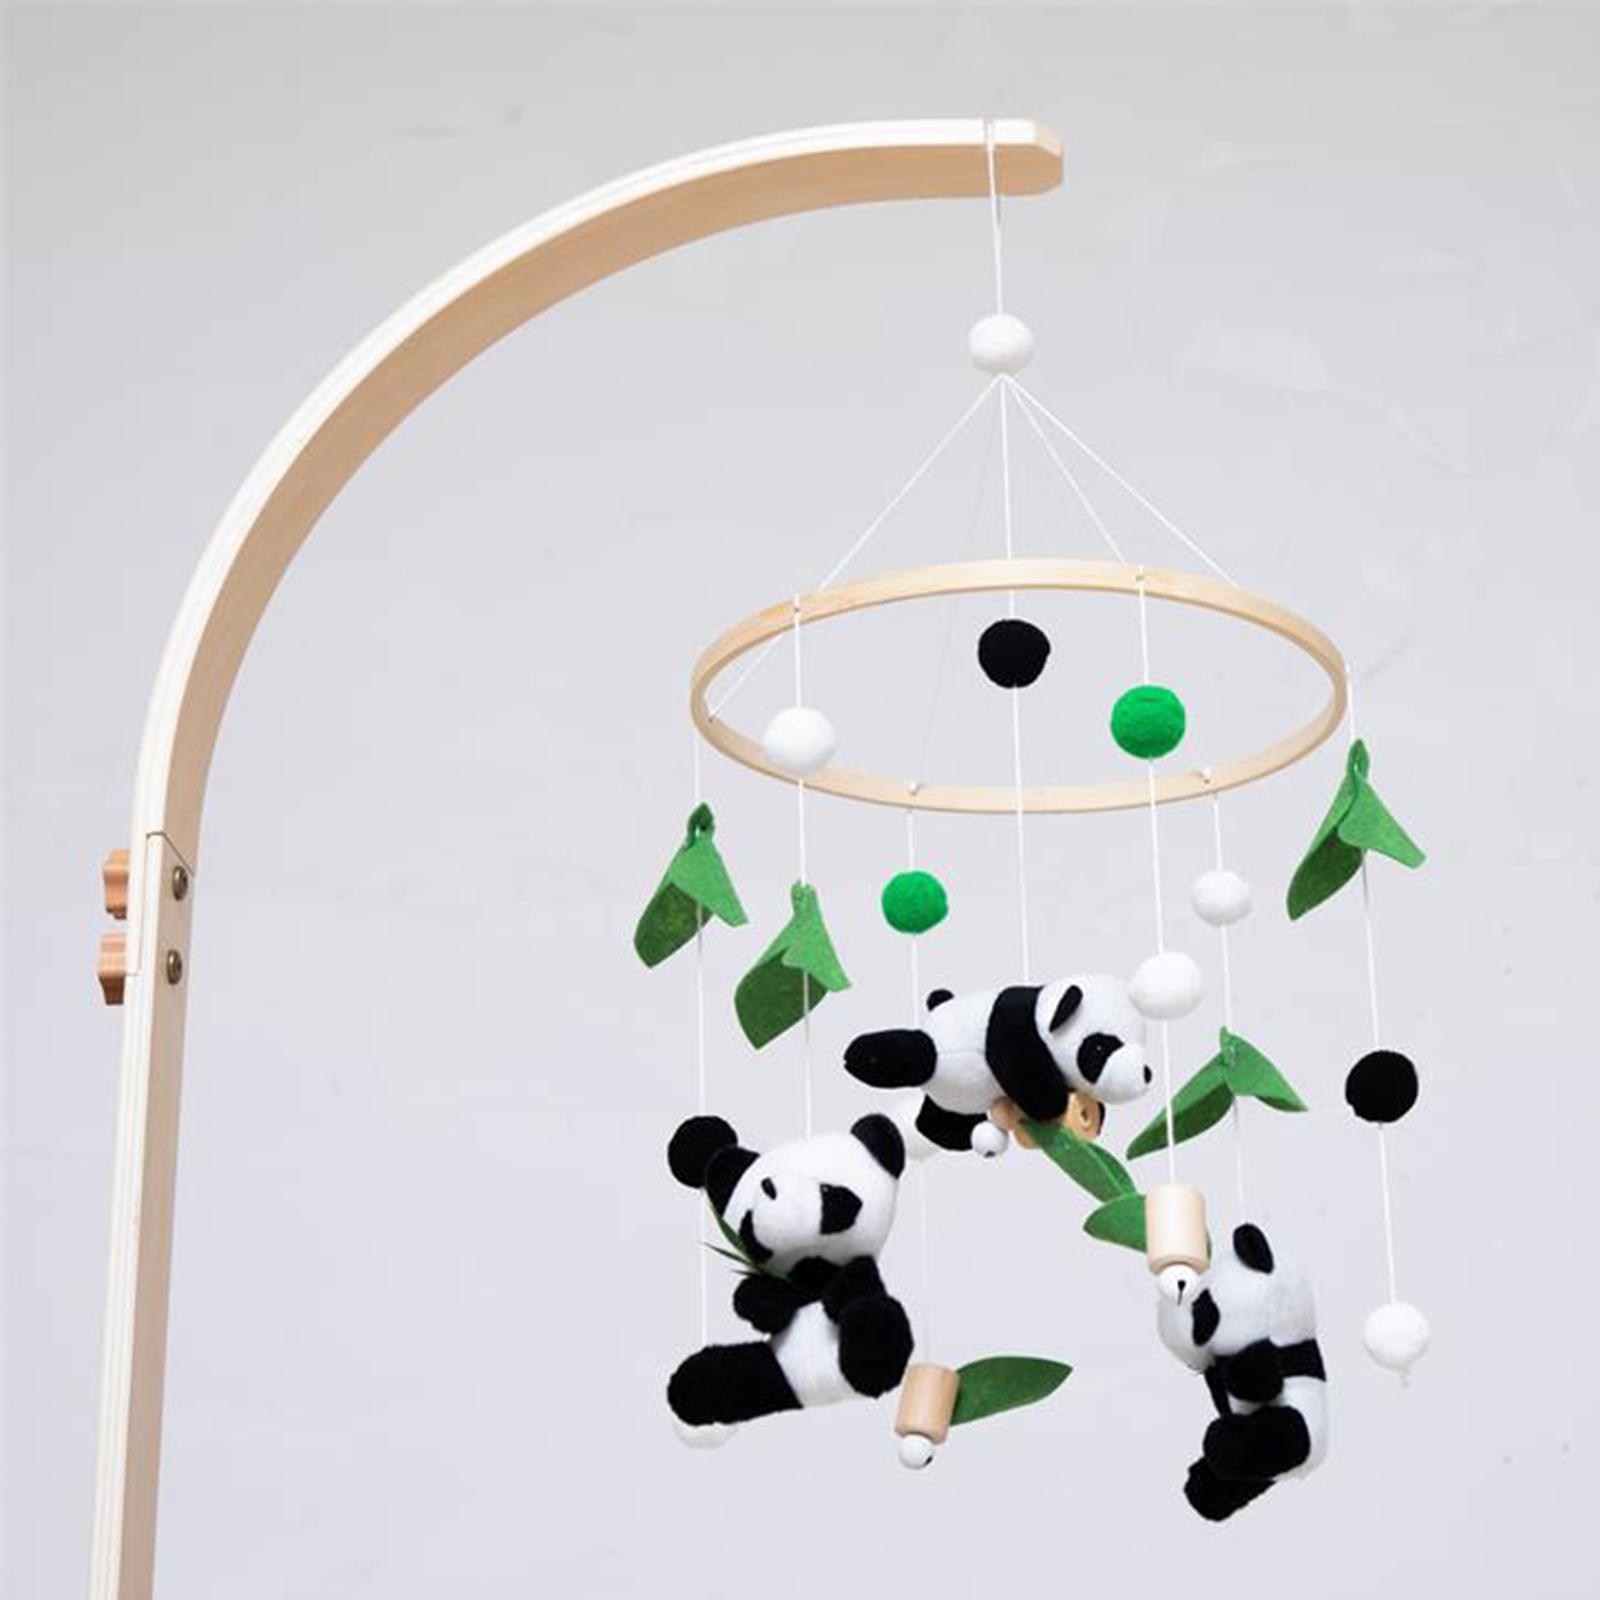 Perfeclan Panda Shape Baby Mobile Toy for Crib Wooden Handmade Cot Toy